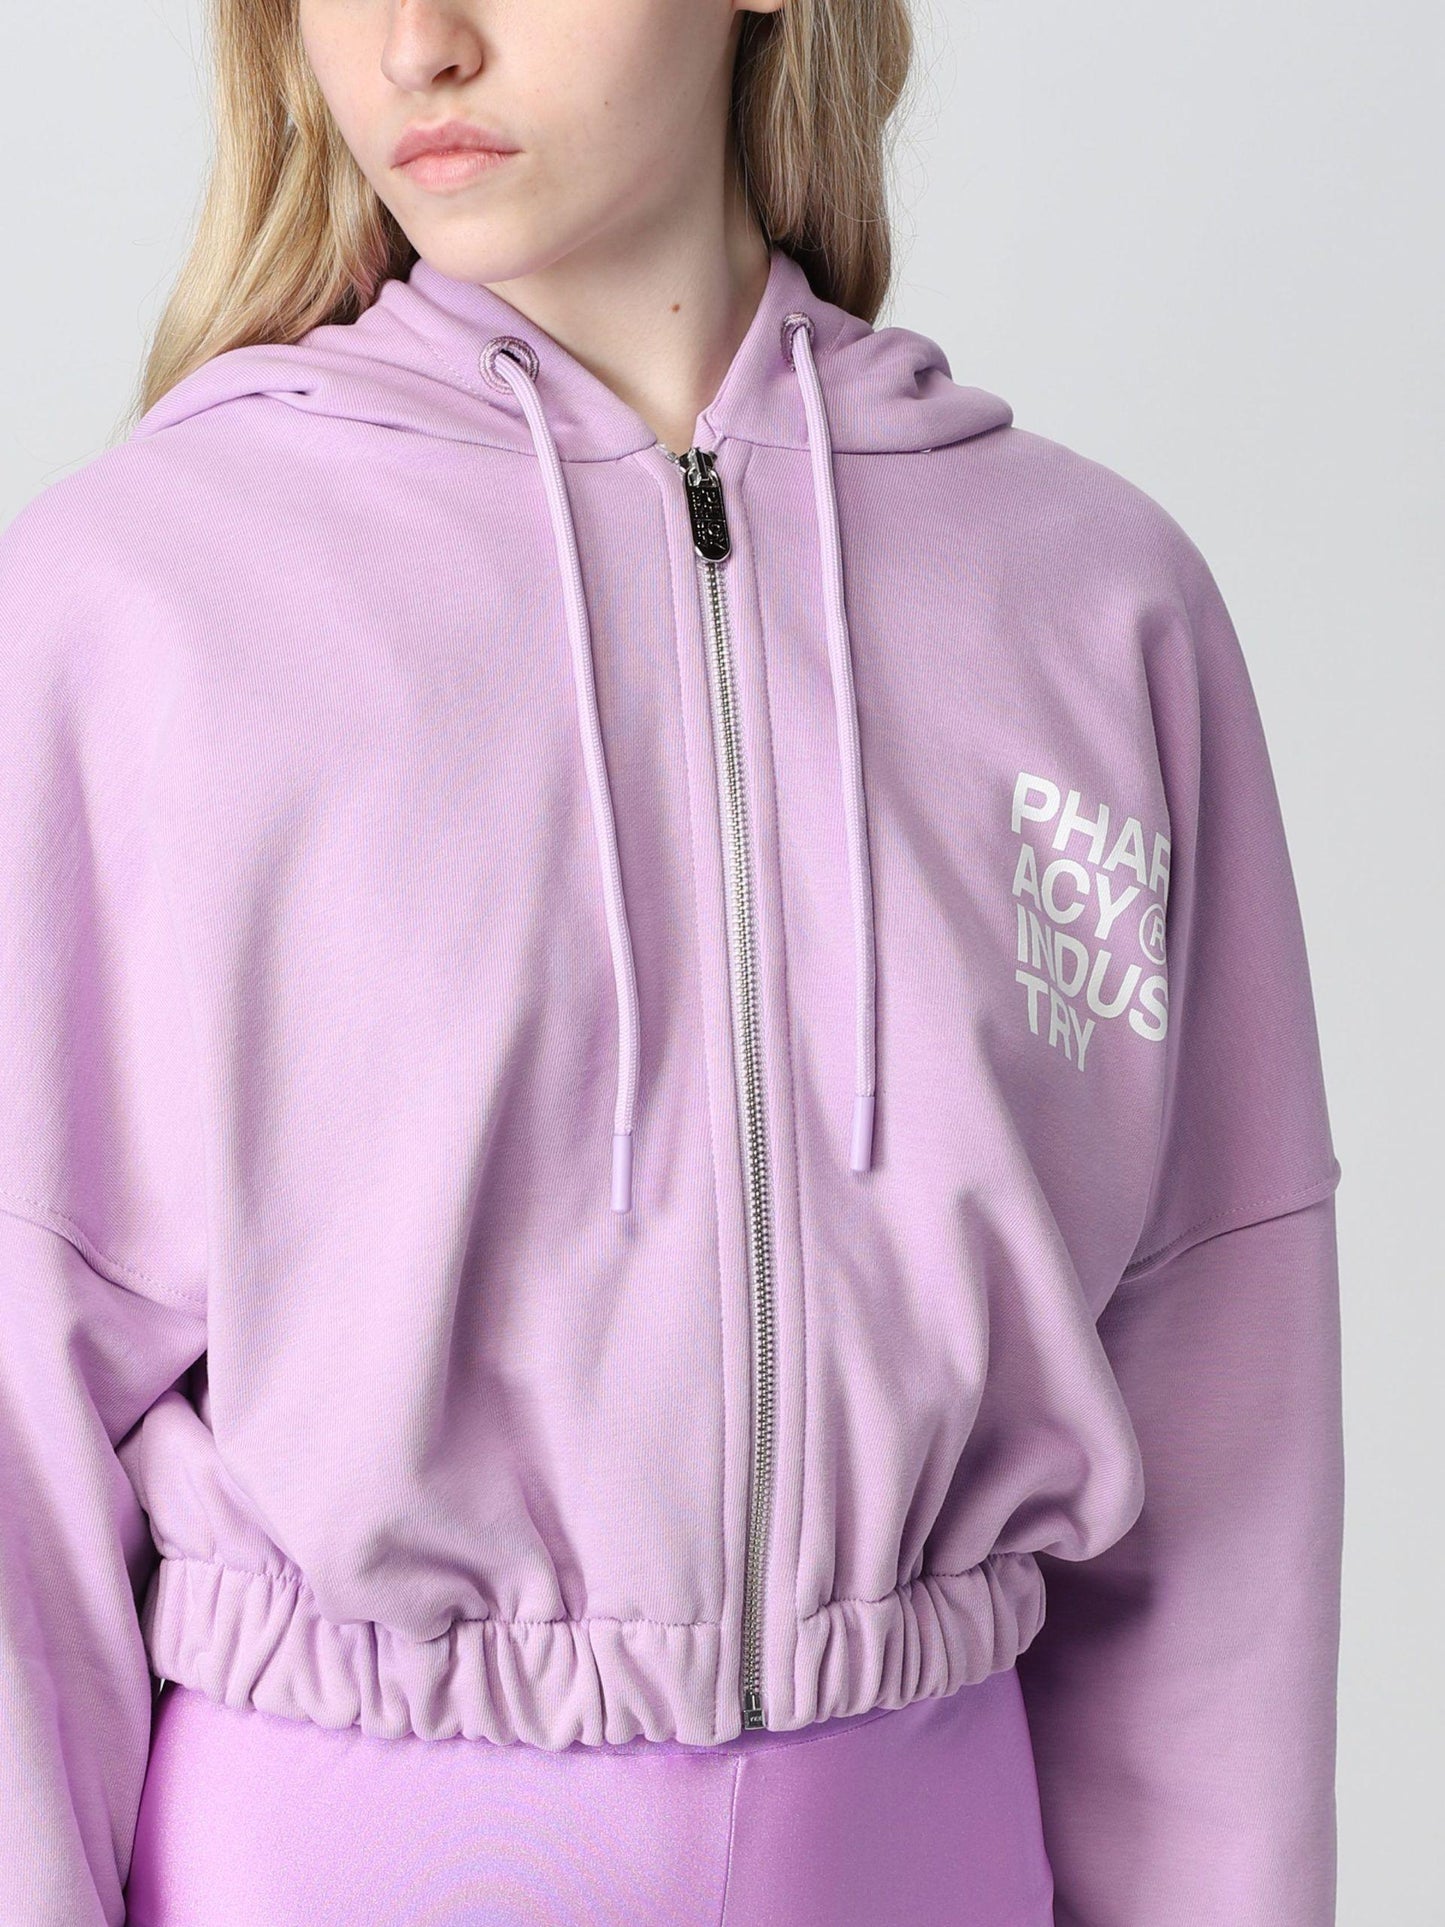 Pharmacy Industry Women's Purple Cotton Zip Hoodie Sweater designed by Pharmacy Industry available from Moon Behind The Hill 's Clothing > Shirts & Tops > Womens range